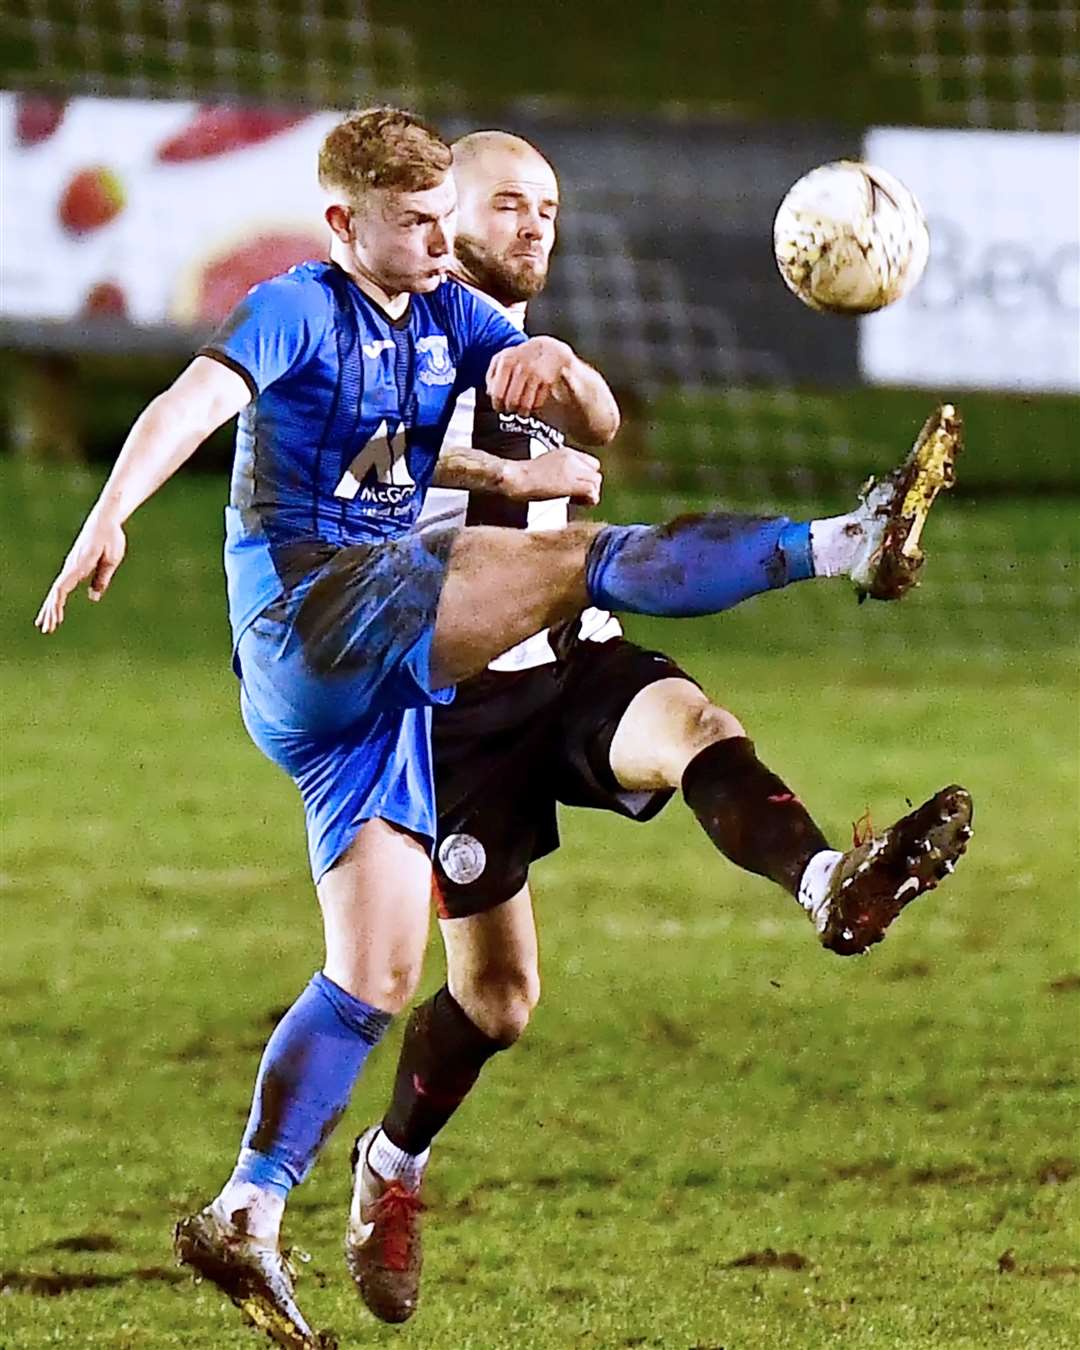 Jack Davison bagged a brace in heavy defeat at Rothes.